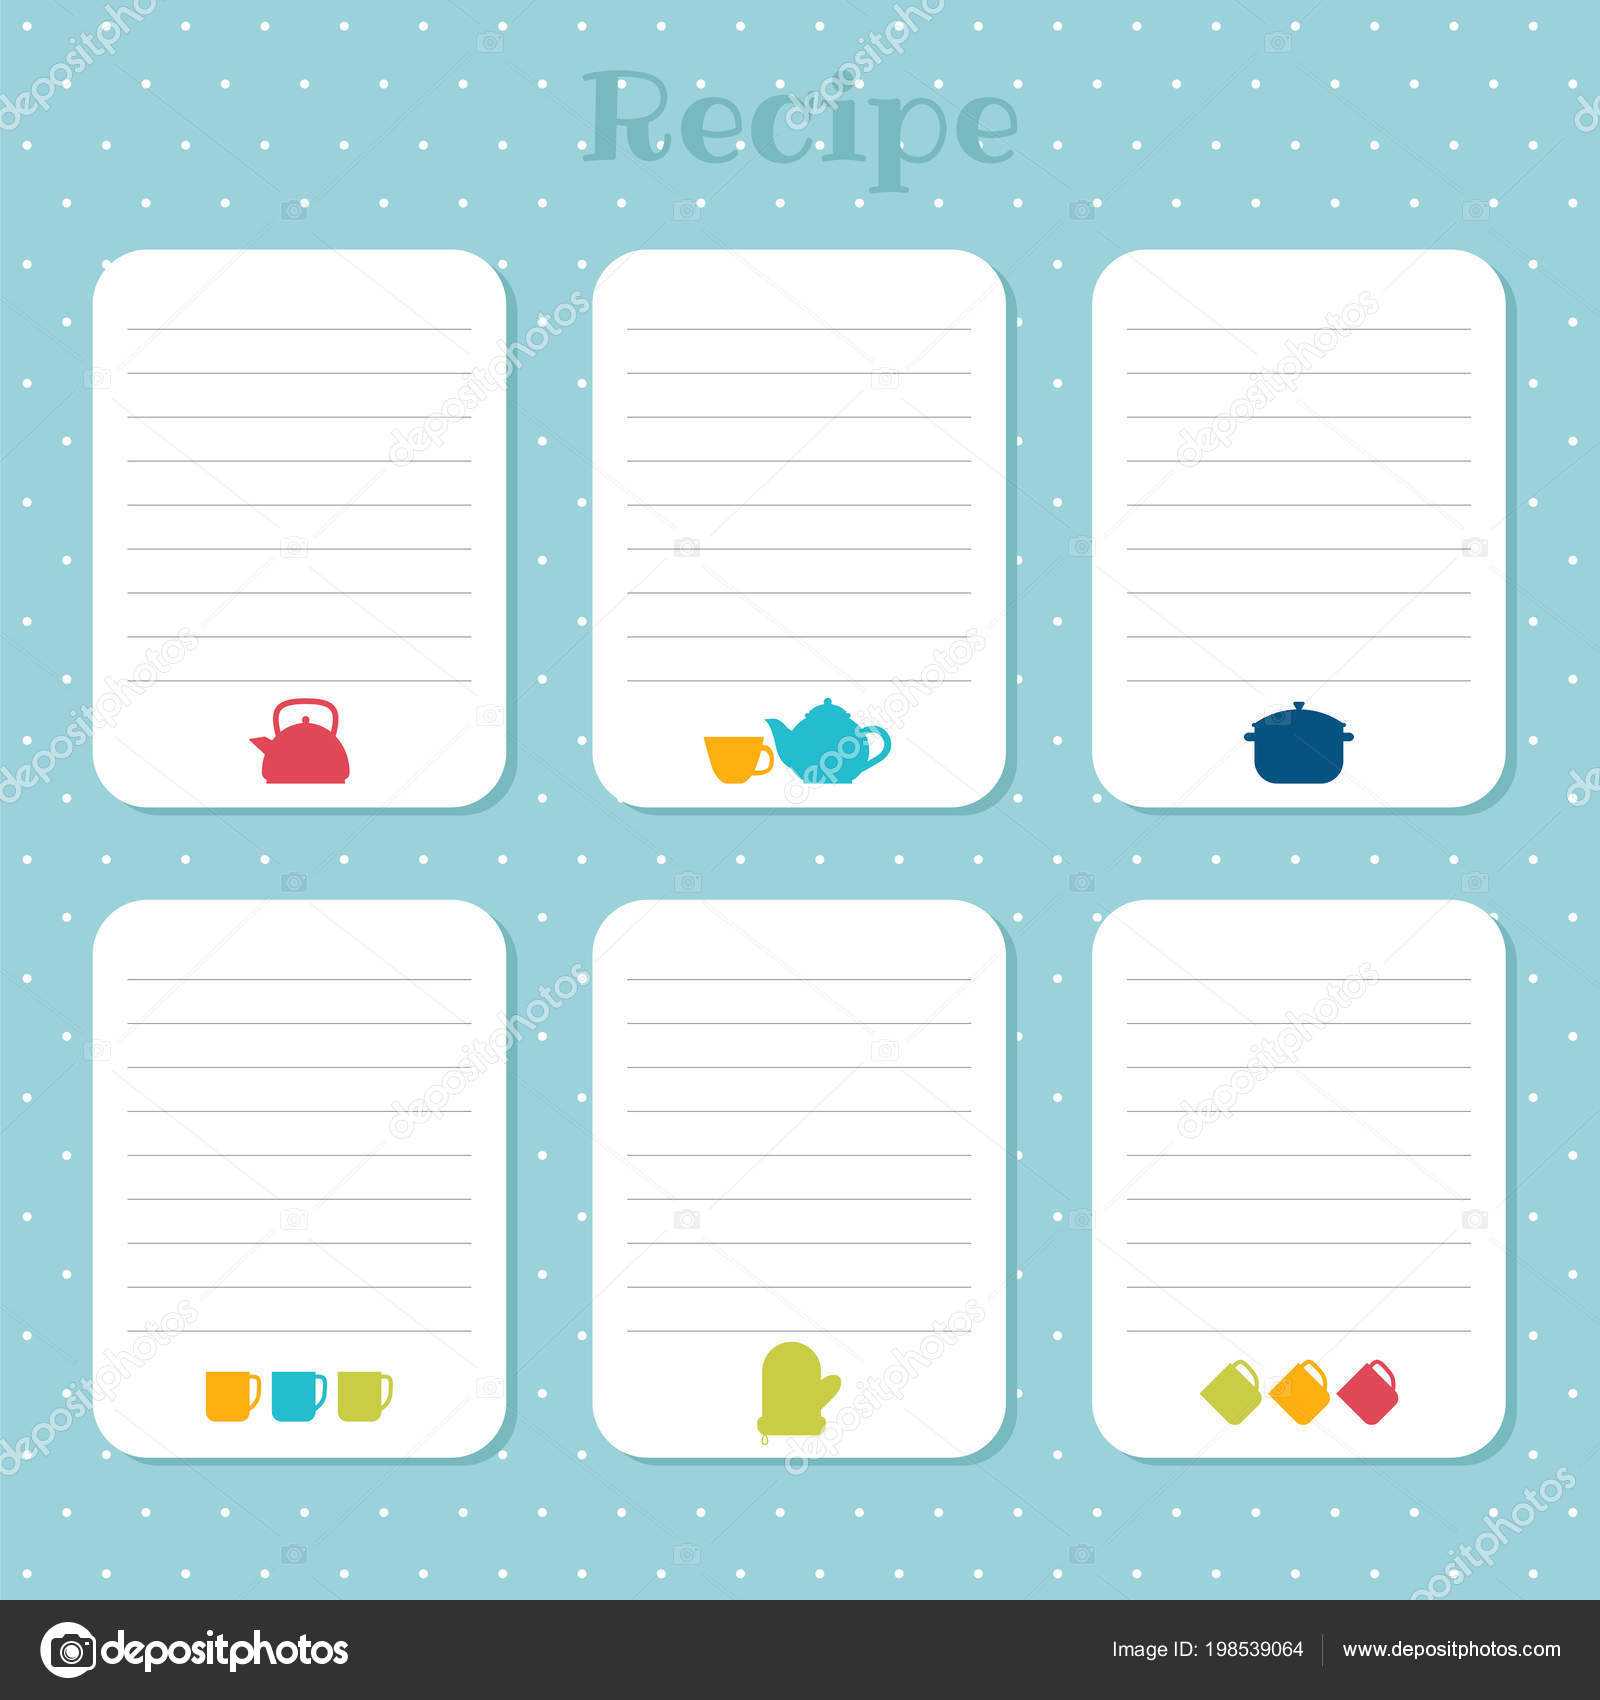 Recipe Card Templates | Recipe Cards Set Cooking Card Within Restaurant Recipe Card Template